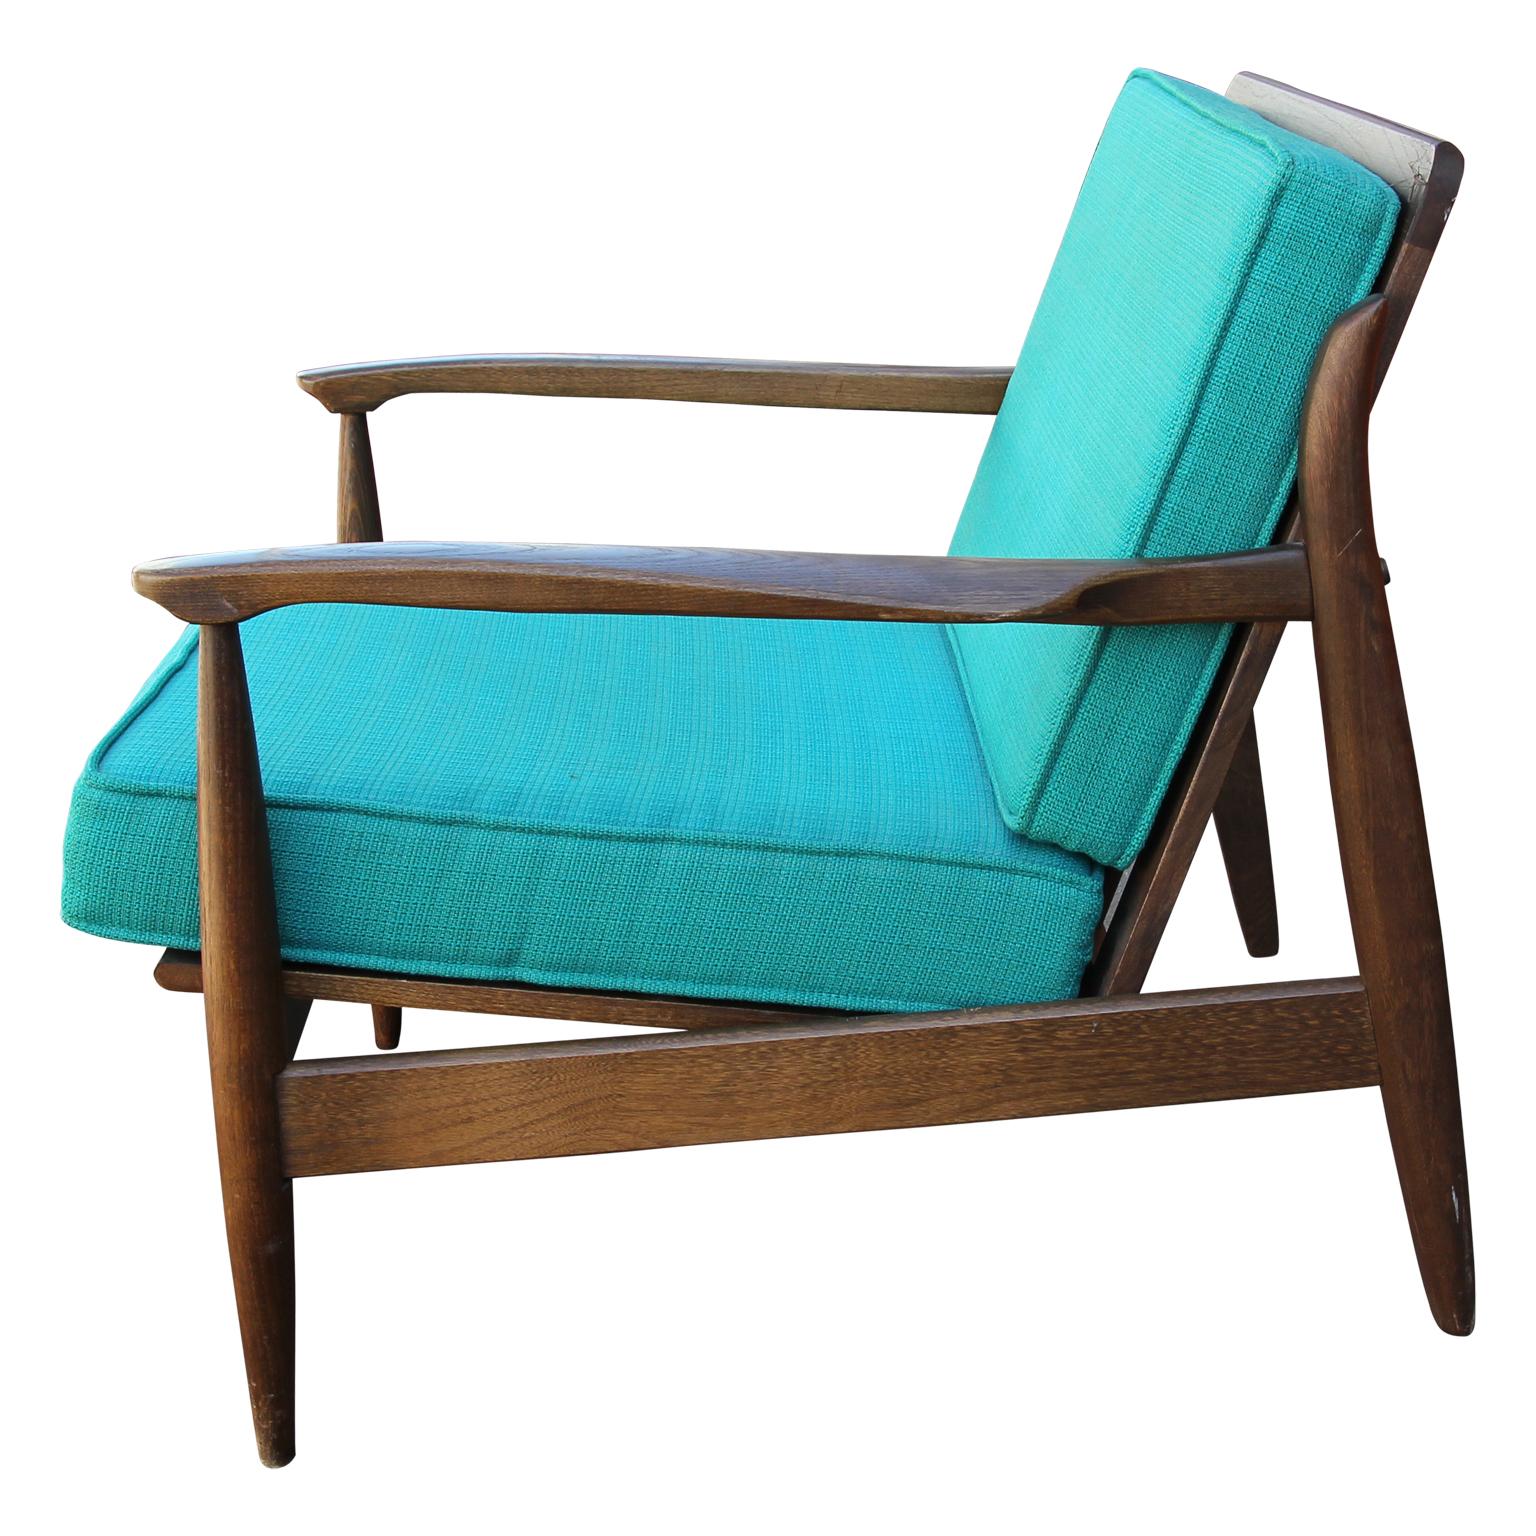 Fantastic teak lounge chair in the Danish style of Svend Age Madsen. The blue upholstered cushions add a pop of color. A wonderful example of minimal modern design. 


  